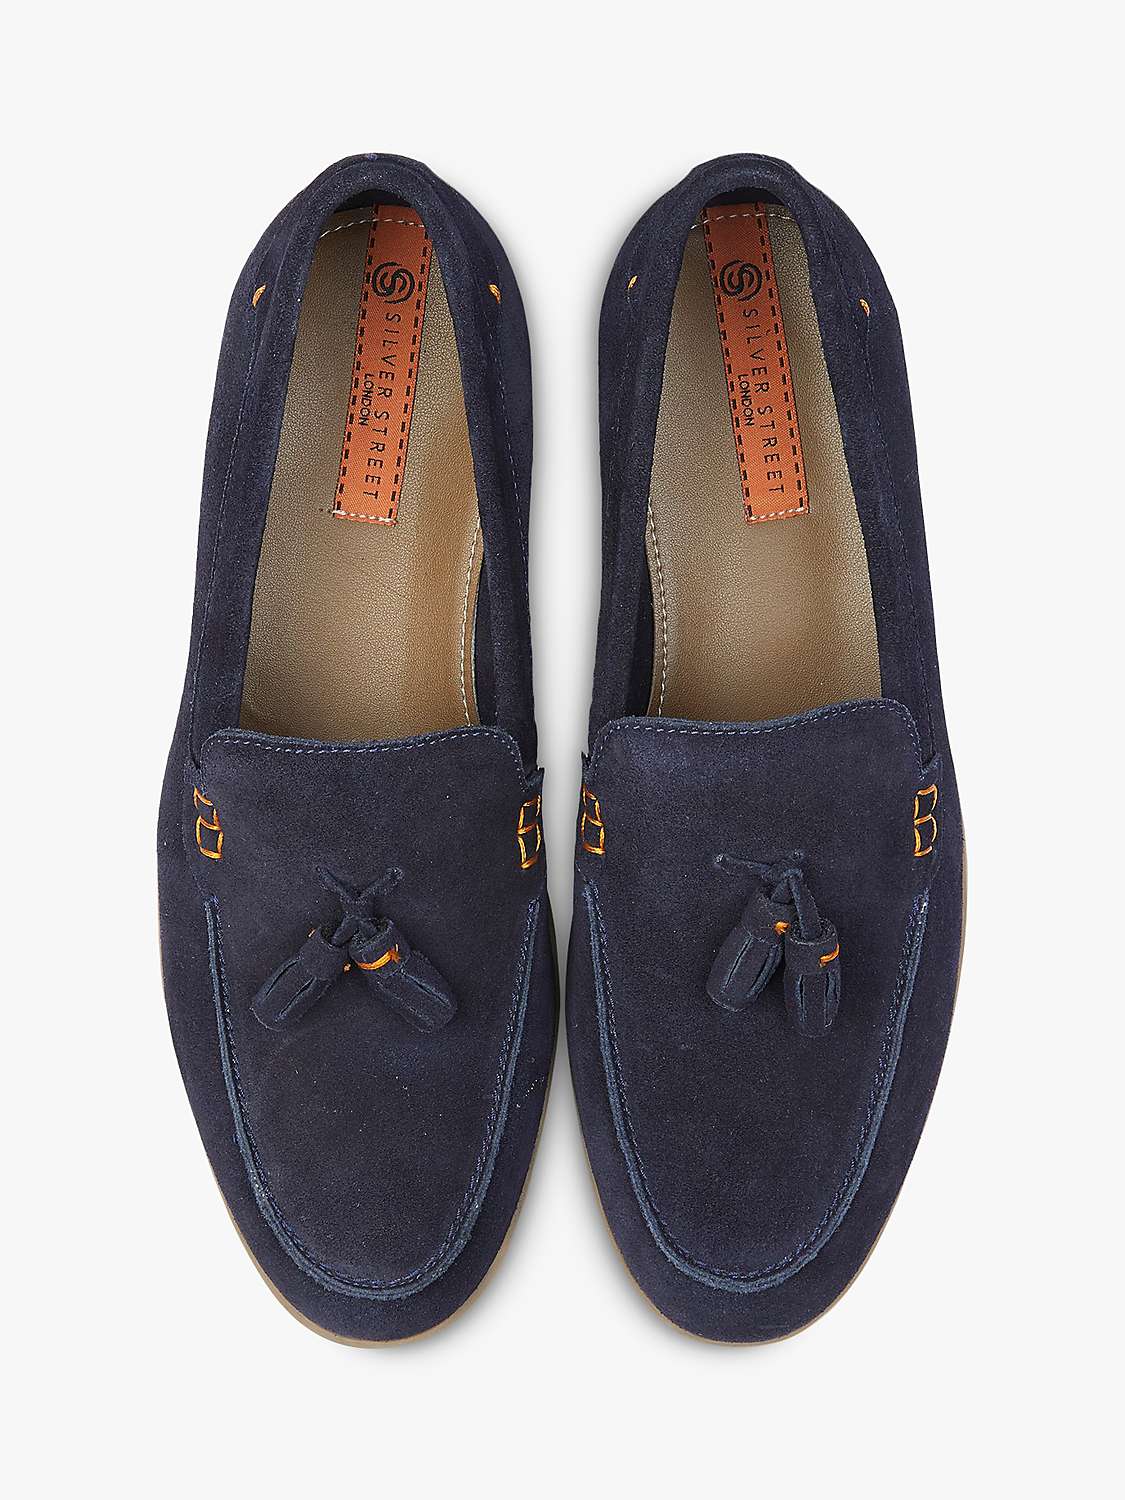 Buy Silver Street London Wembley Suede Loafers Online at johnlewis.com